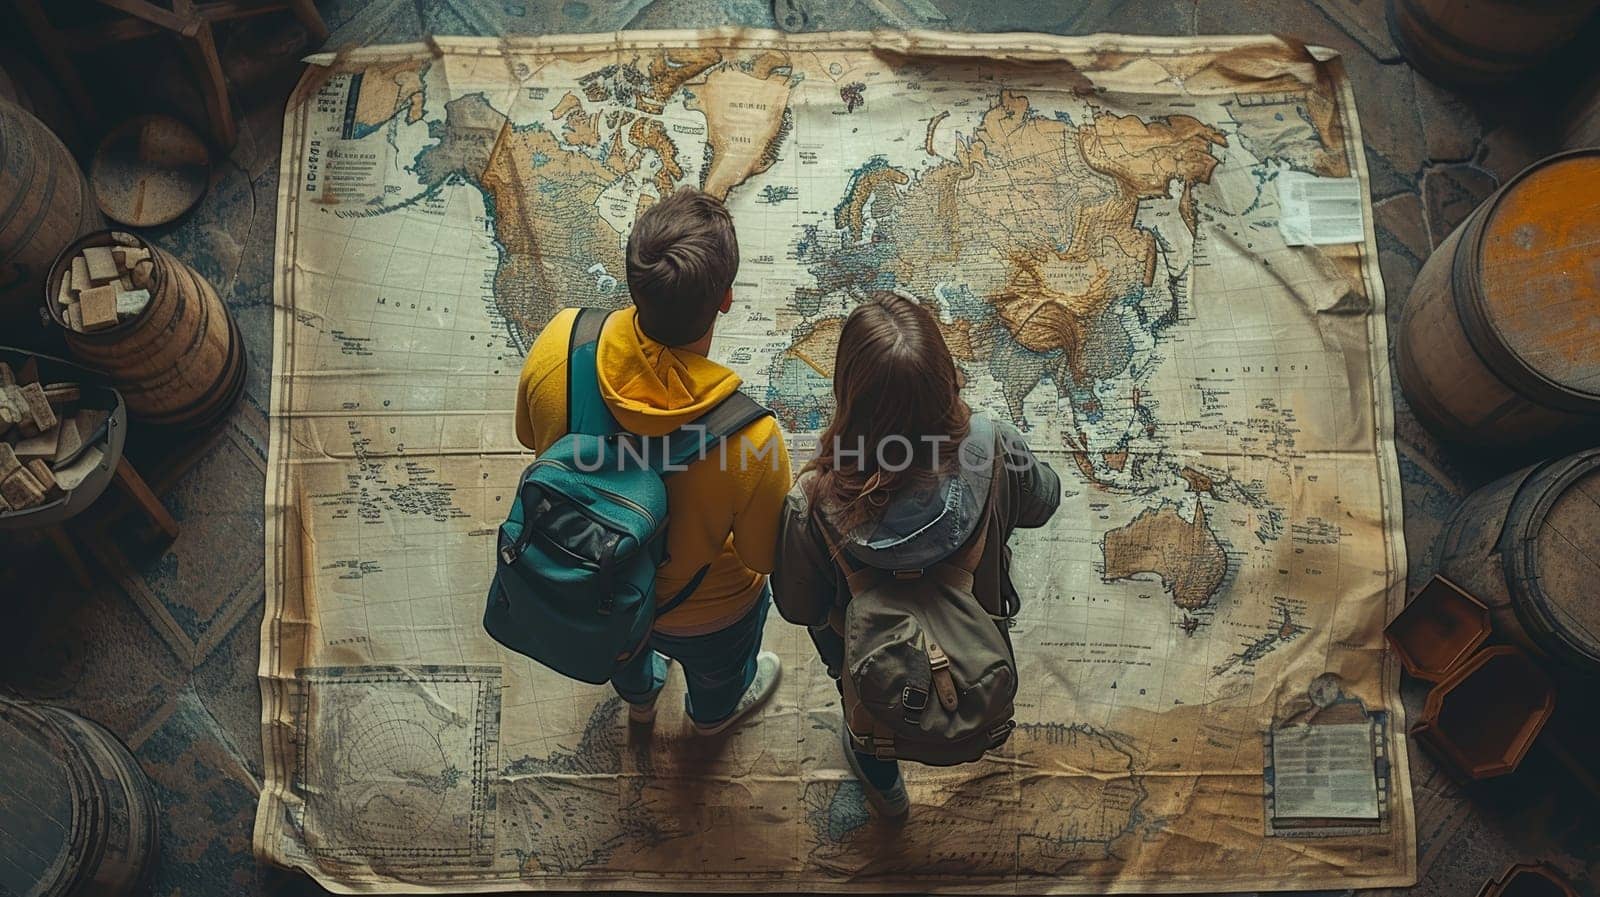 Orientation map for honeymoon vacation for young couple. Pointing to Europe Rome.